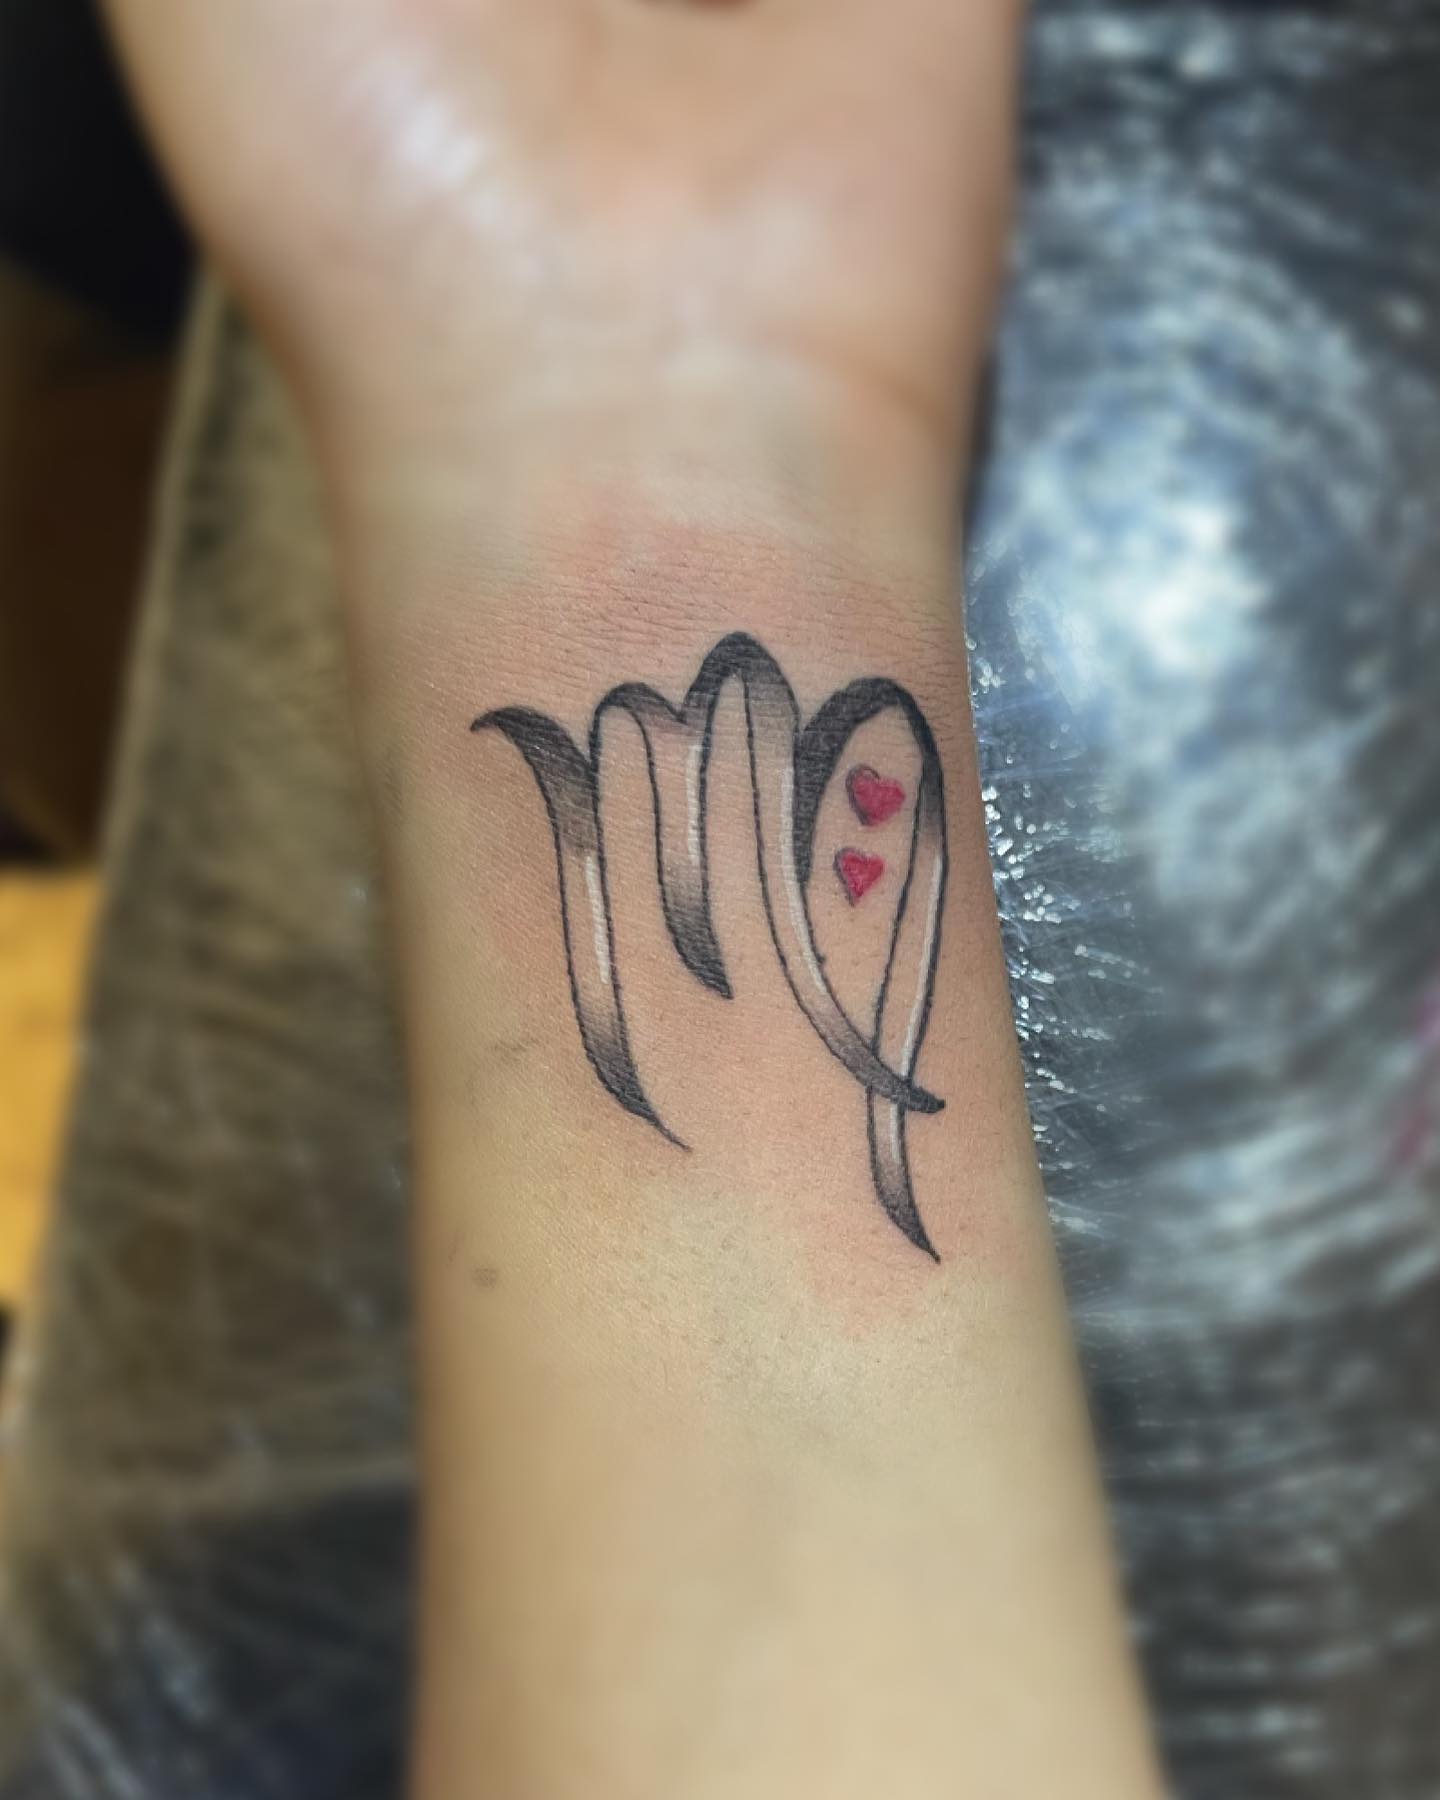 Get a Virgo tattoo on one of the most delicate locations on your body, the wrist. Adding two little red hearts can give this tattoo a cute look.